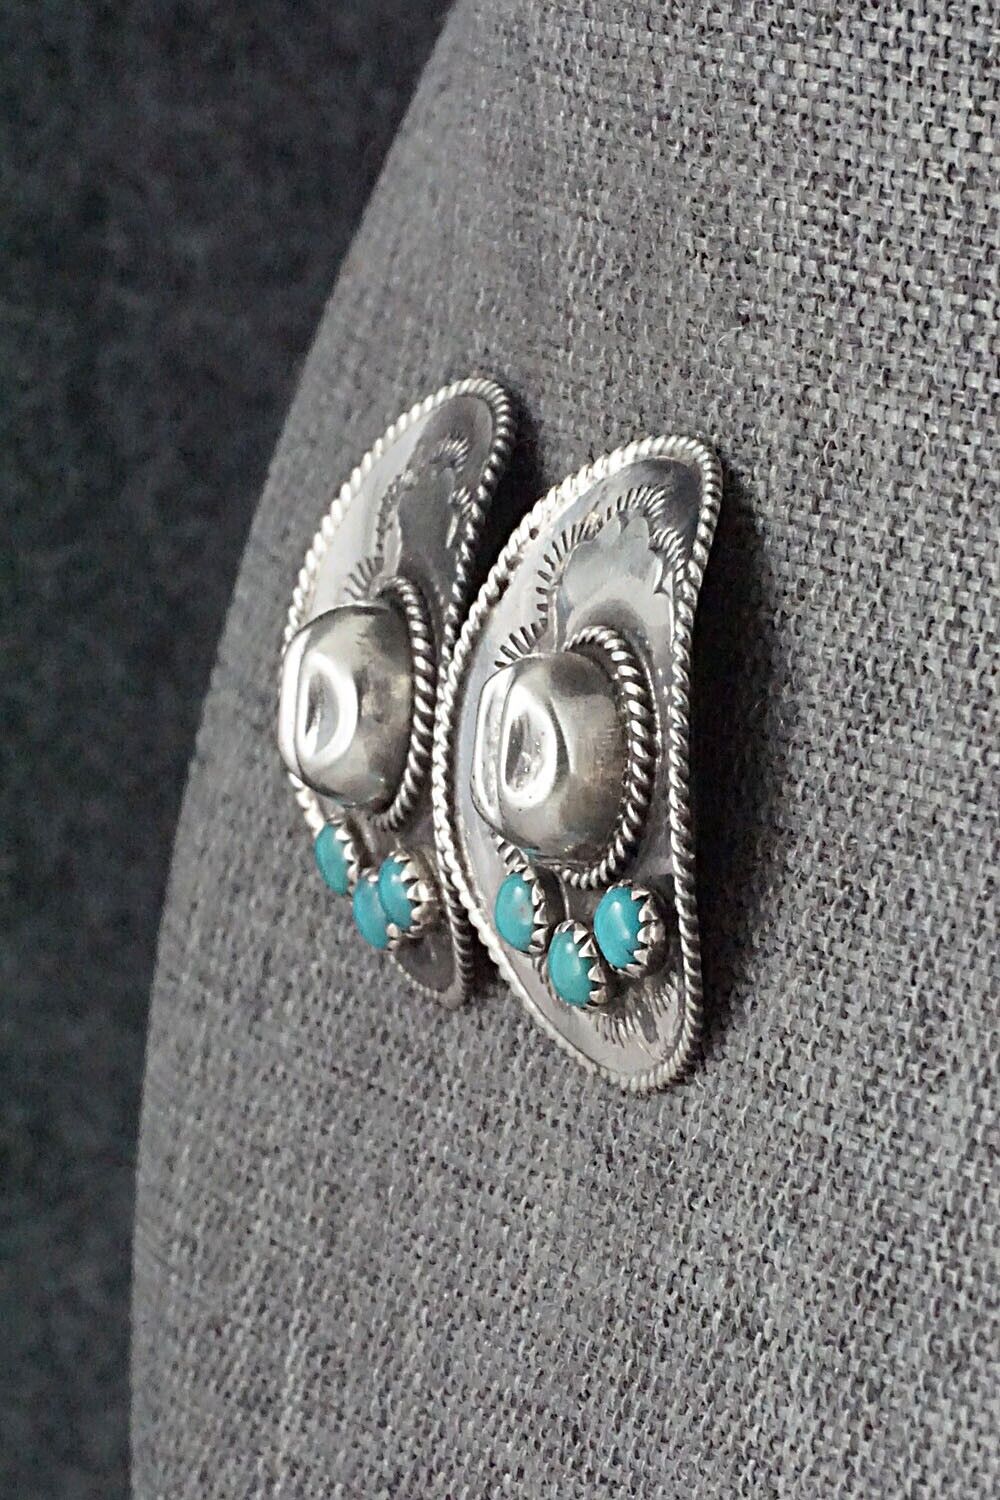 Turquoise & Sterling Silver Earrings - Bobby Platero